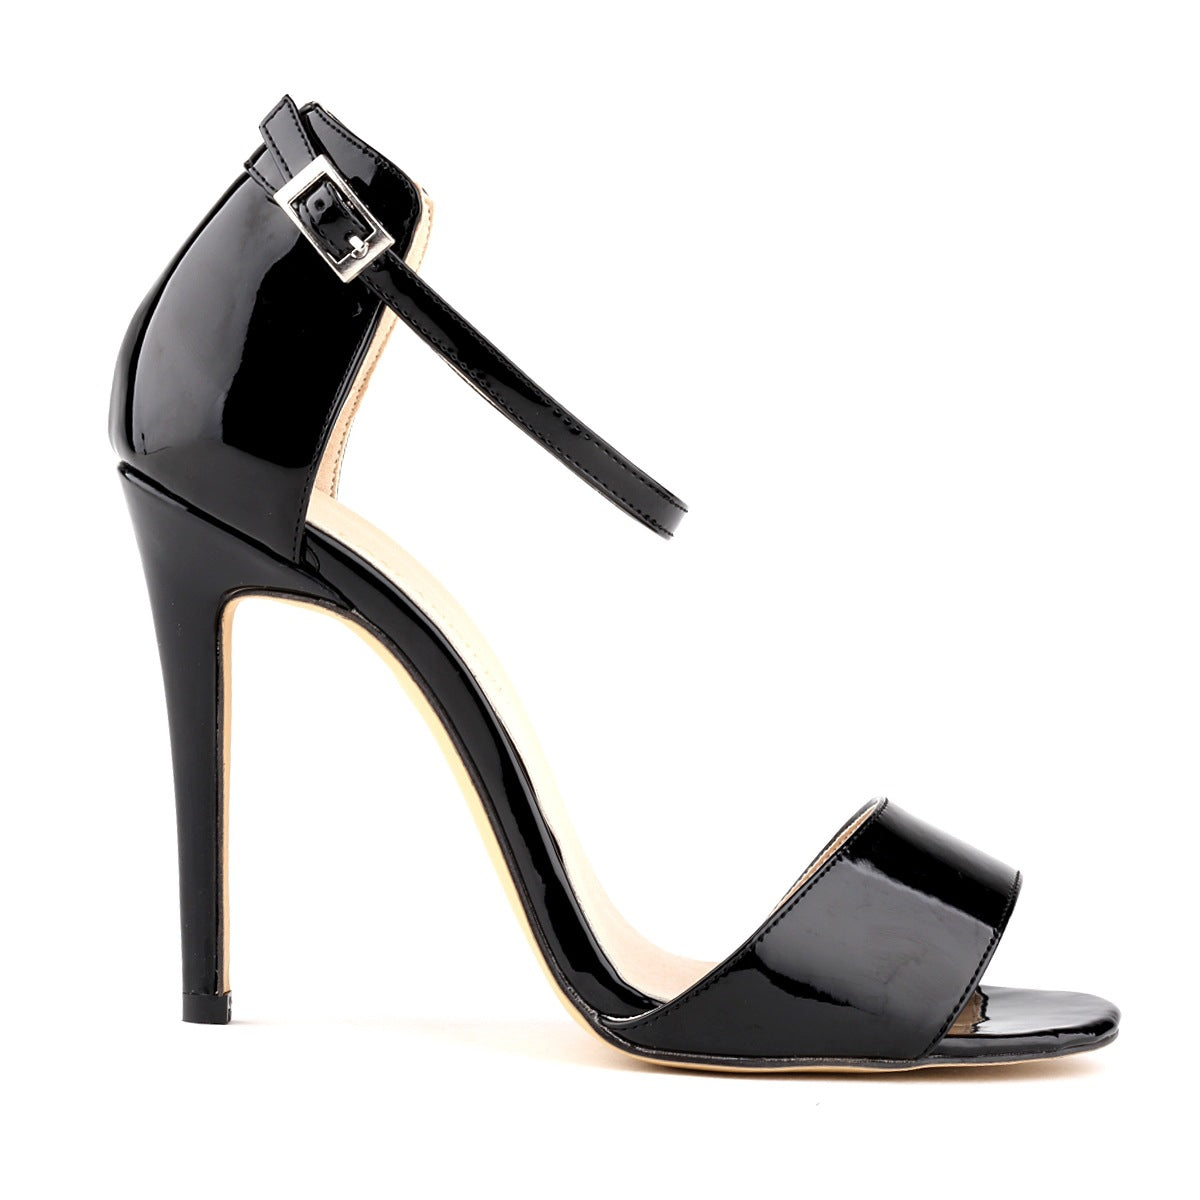 Sexy High-Heeled Peep-Toe Patent Leather Sandals